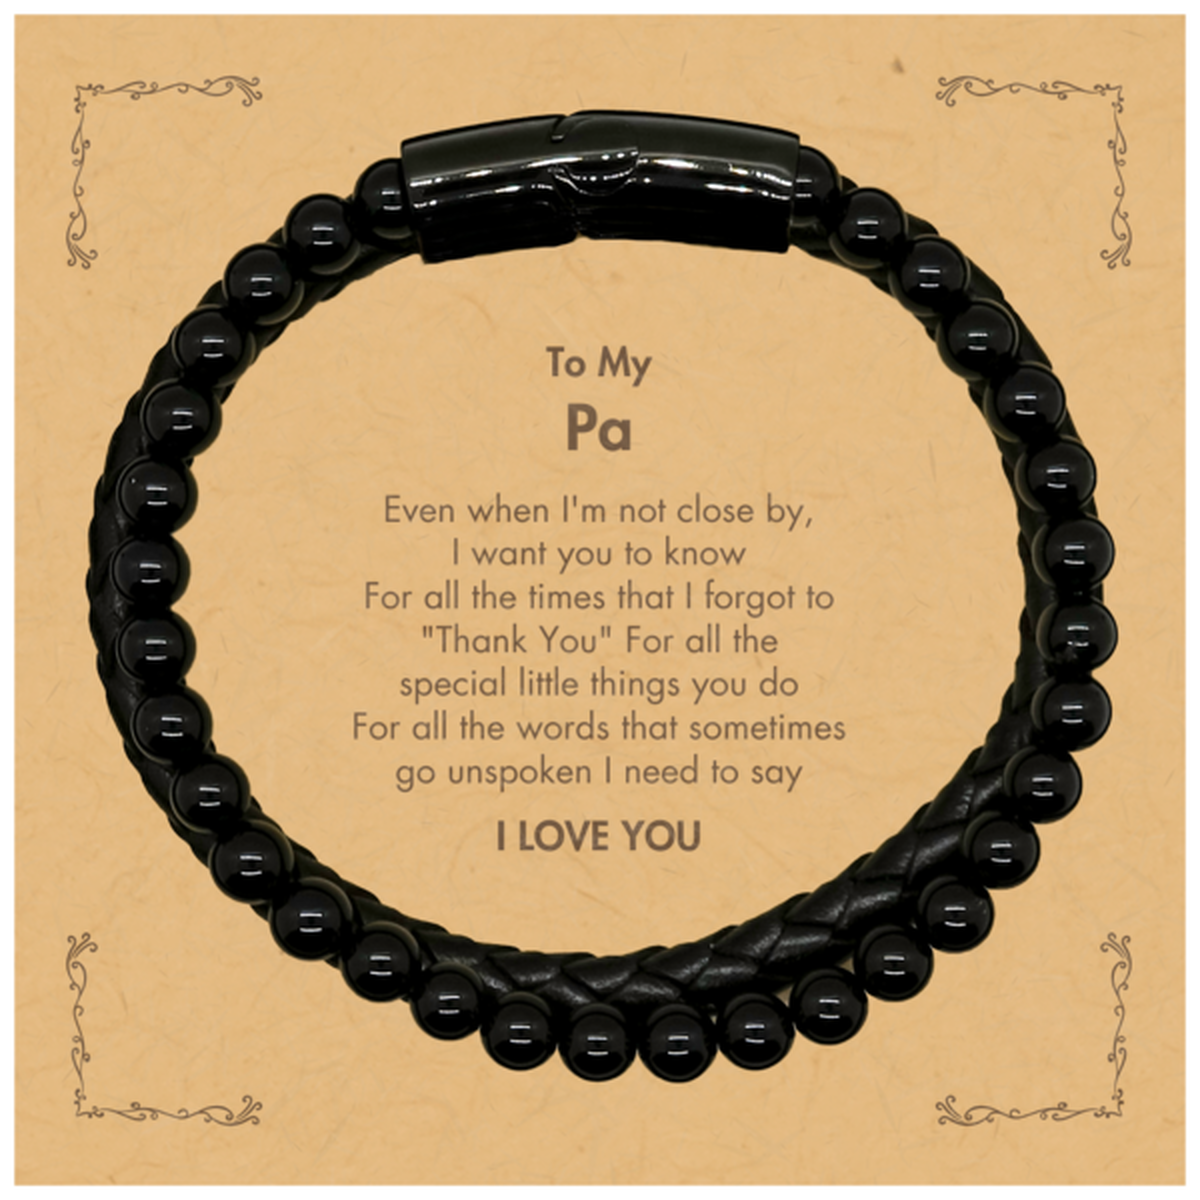 Thank You Gifts for Pa, Keepsake Stone Leather Bracelets Gifts for Pa Birthday Mother's day Father's Day Pa For all the words That sometimes go unspoken I need to say I LOVE YOU